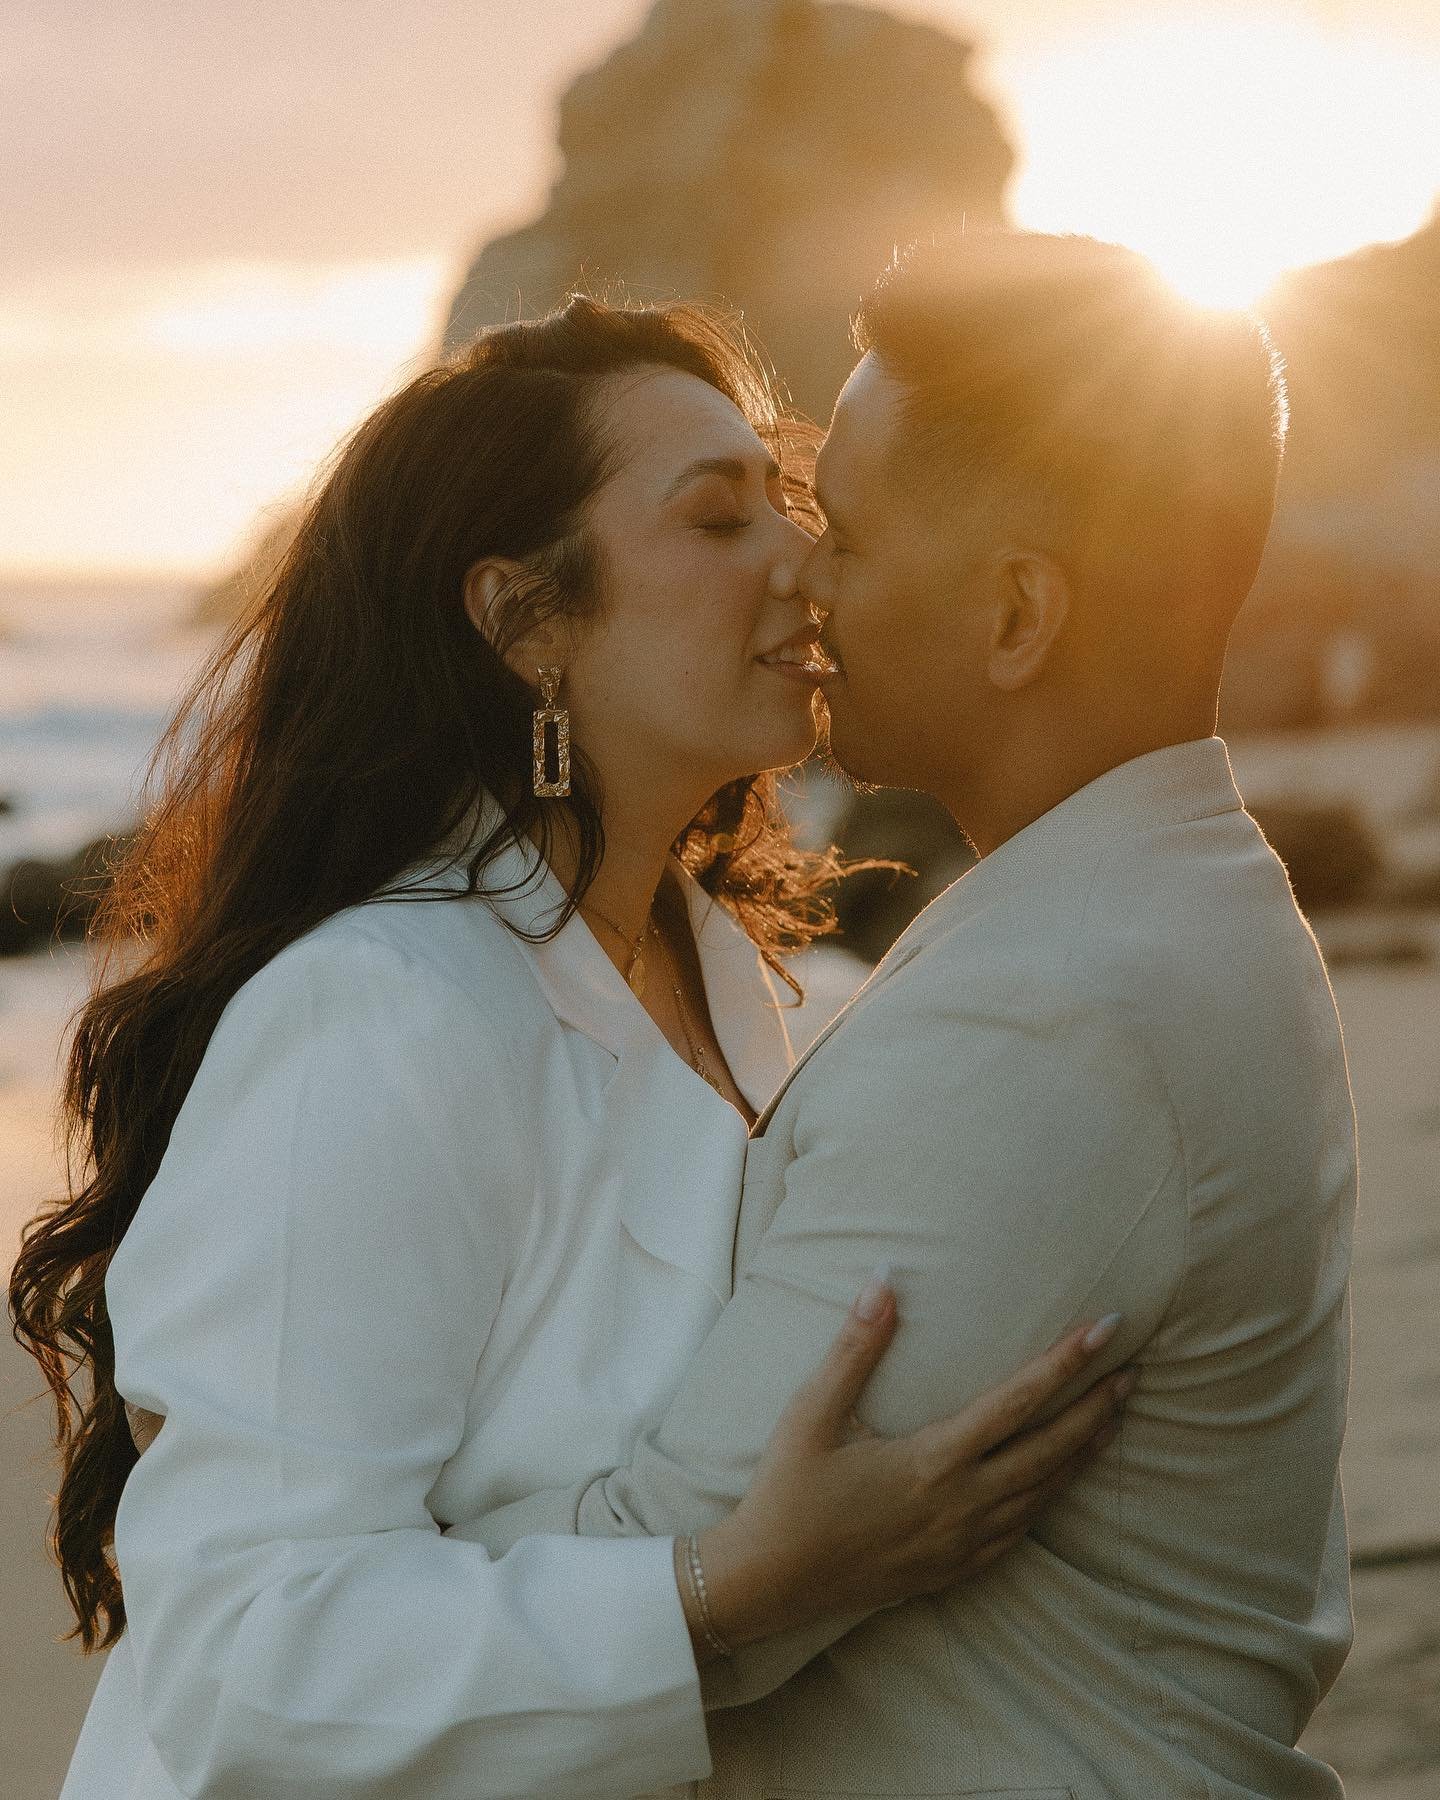 Nothing like a bright red gold sunset in one for our favorite places ✨🤍
.
.
.
.
#malibu#malibuphotographer#malibuengagement 🖤